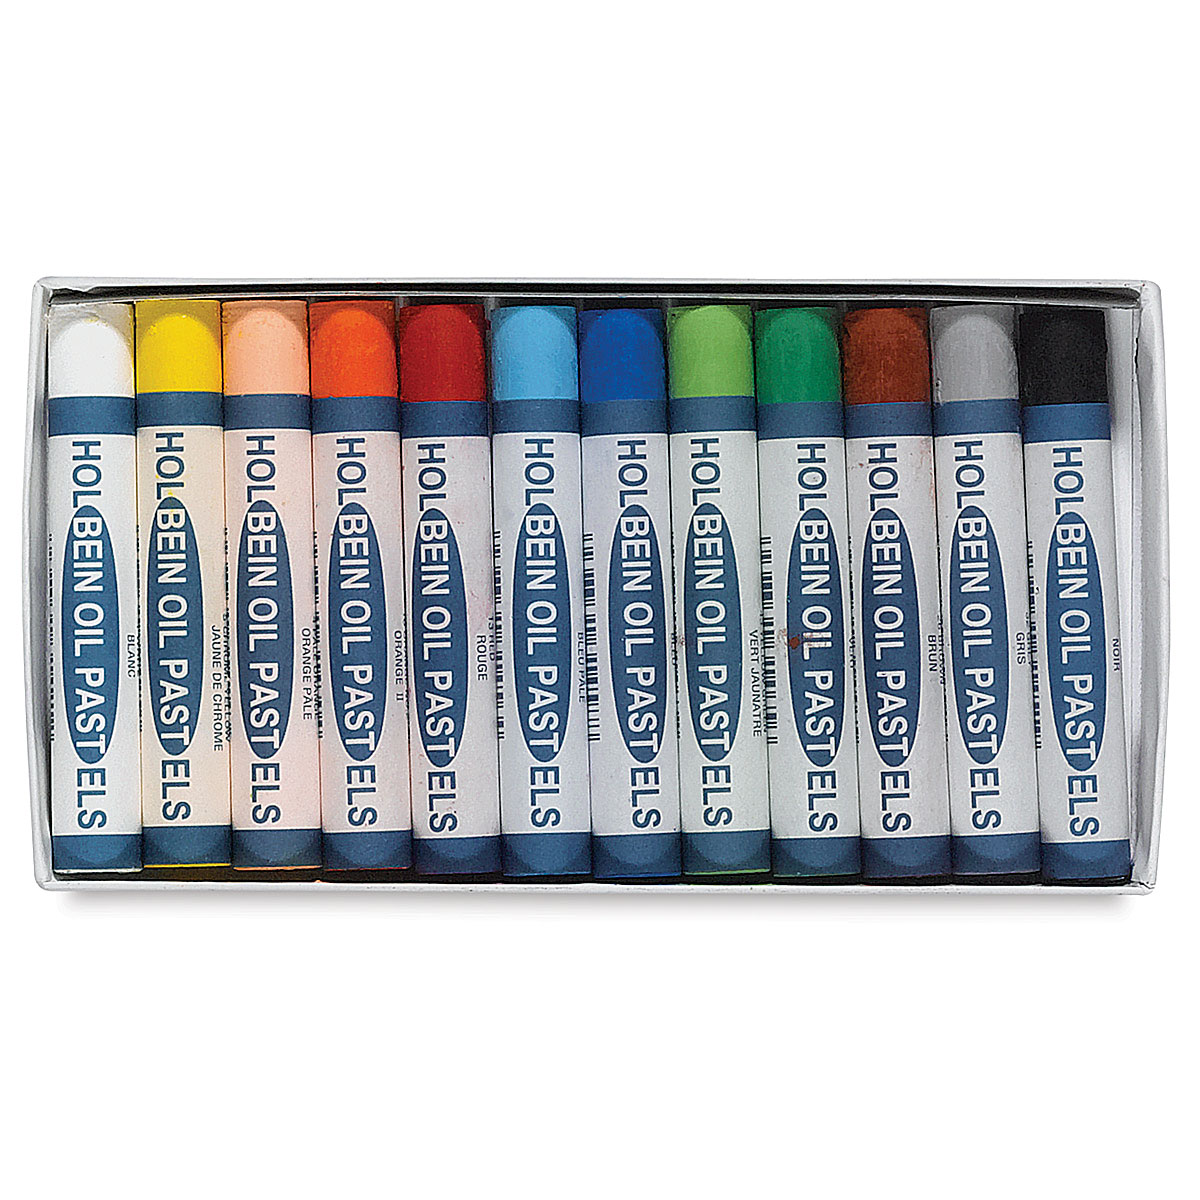 Holbein Academic Oil Pastel Set - Assorted Colors, Set of 36